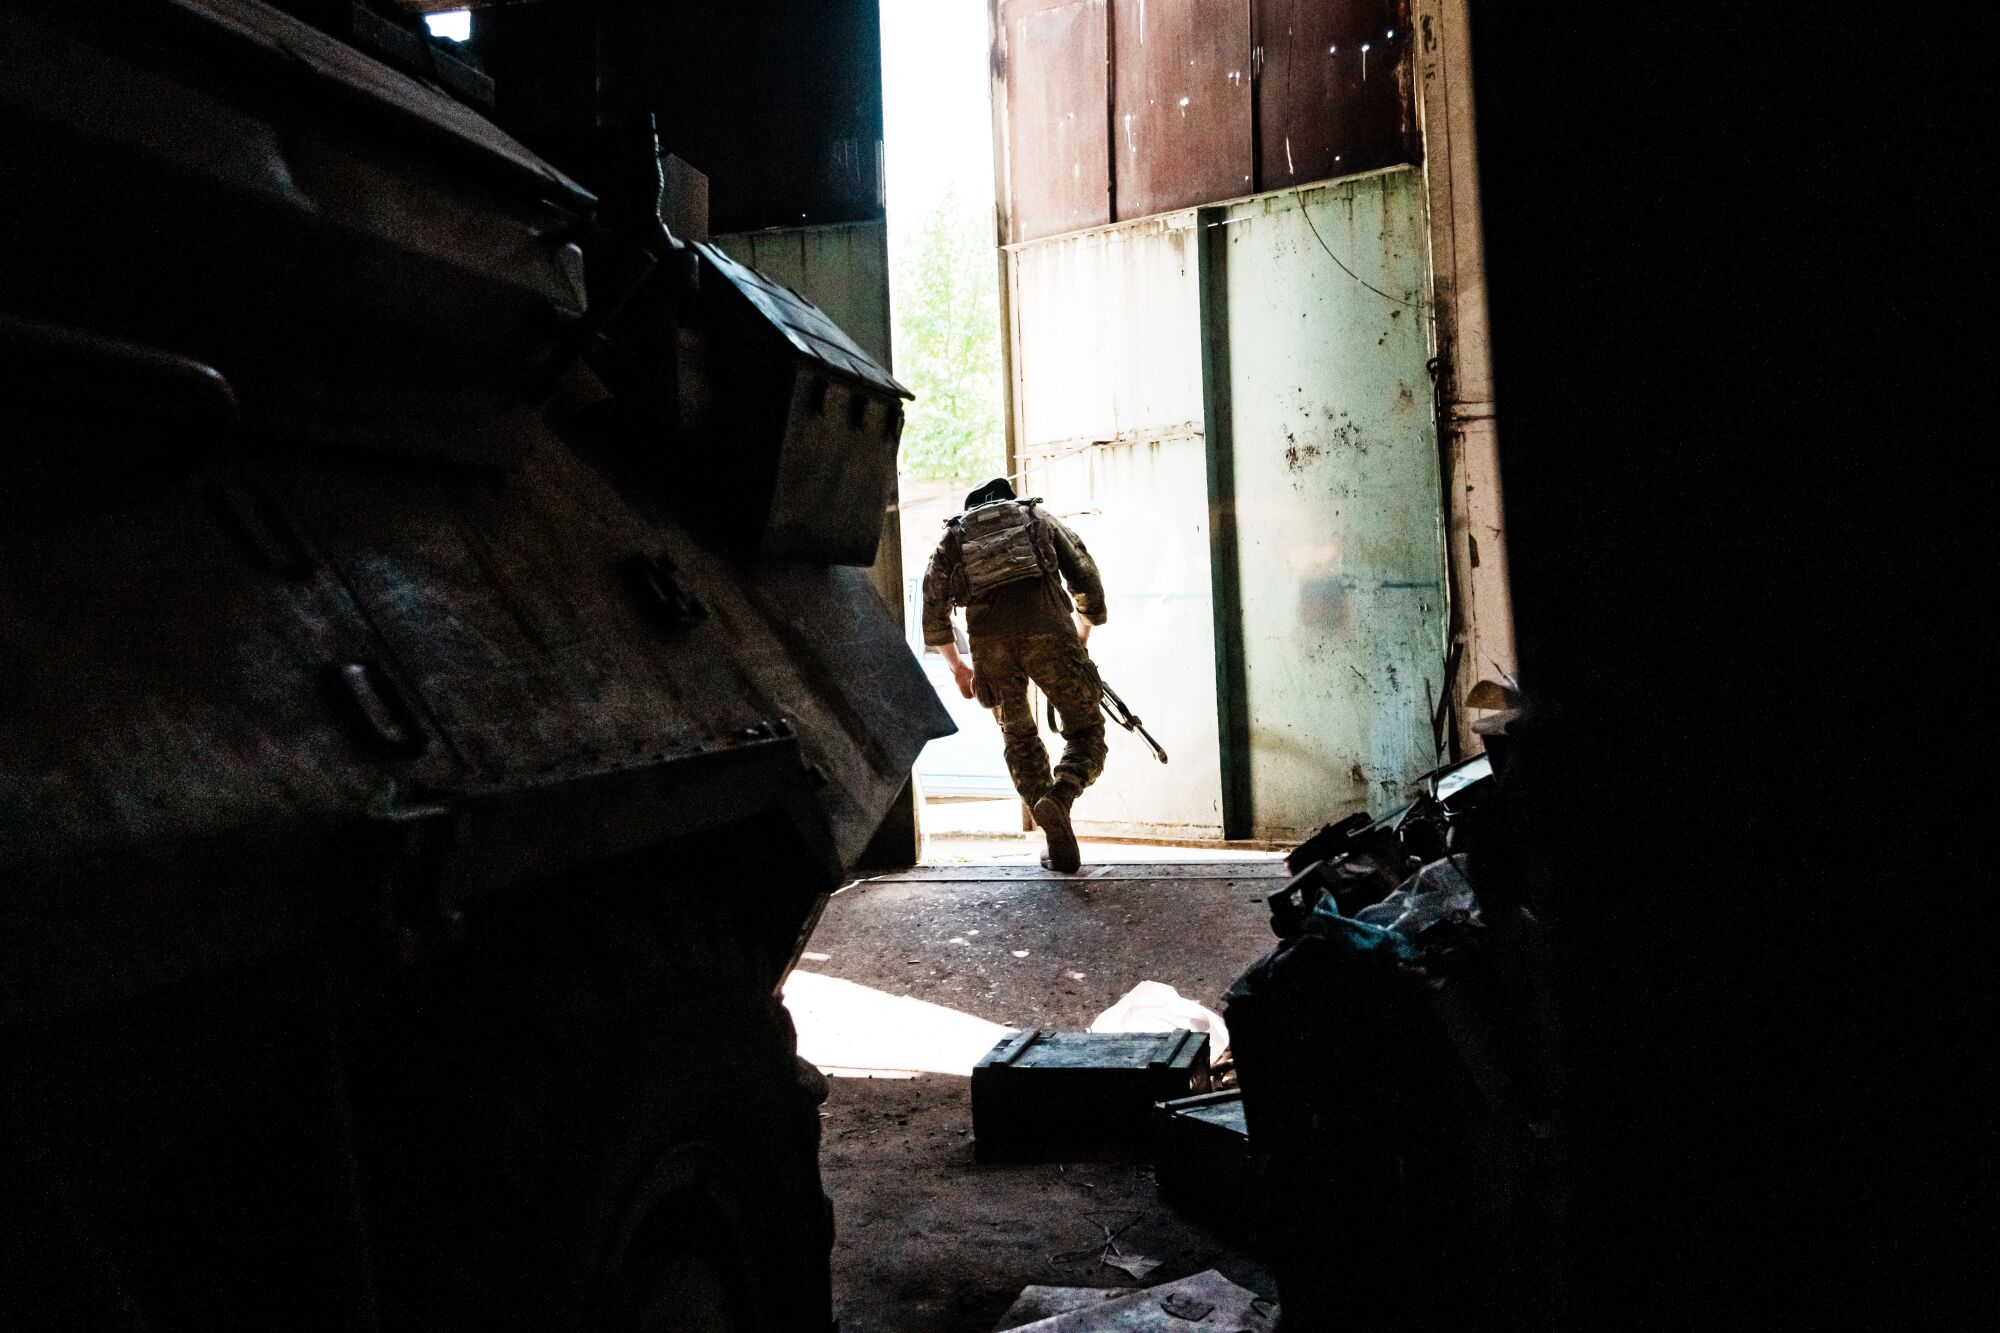  A Ukrainian soldier runs outside from a makeshift military base